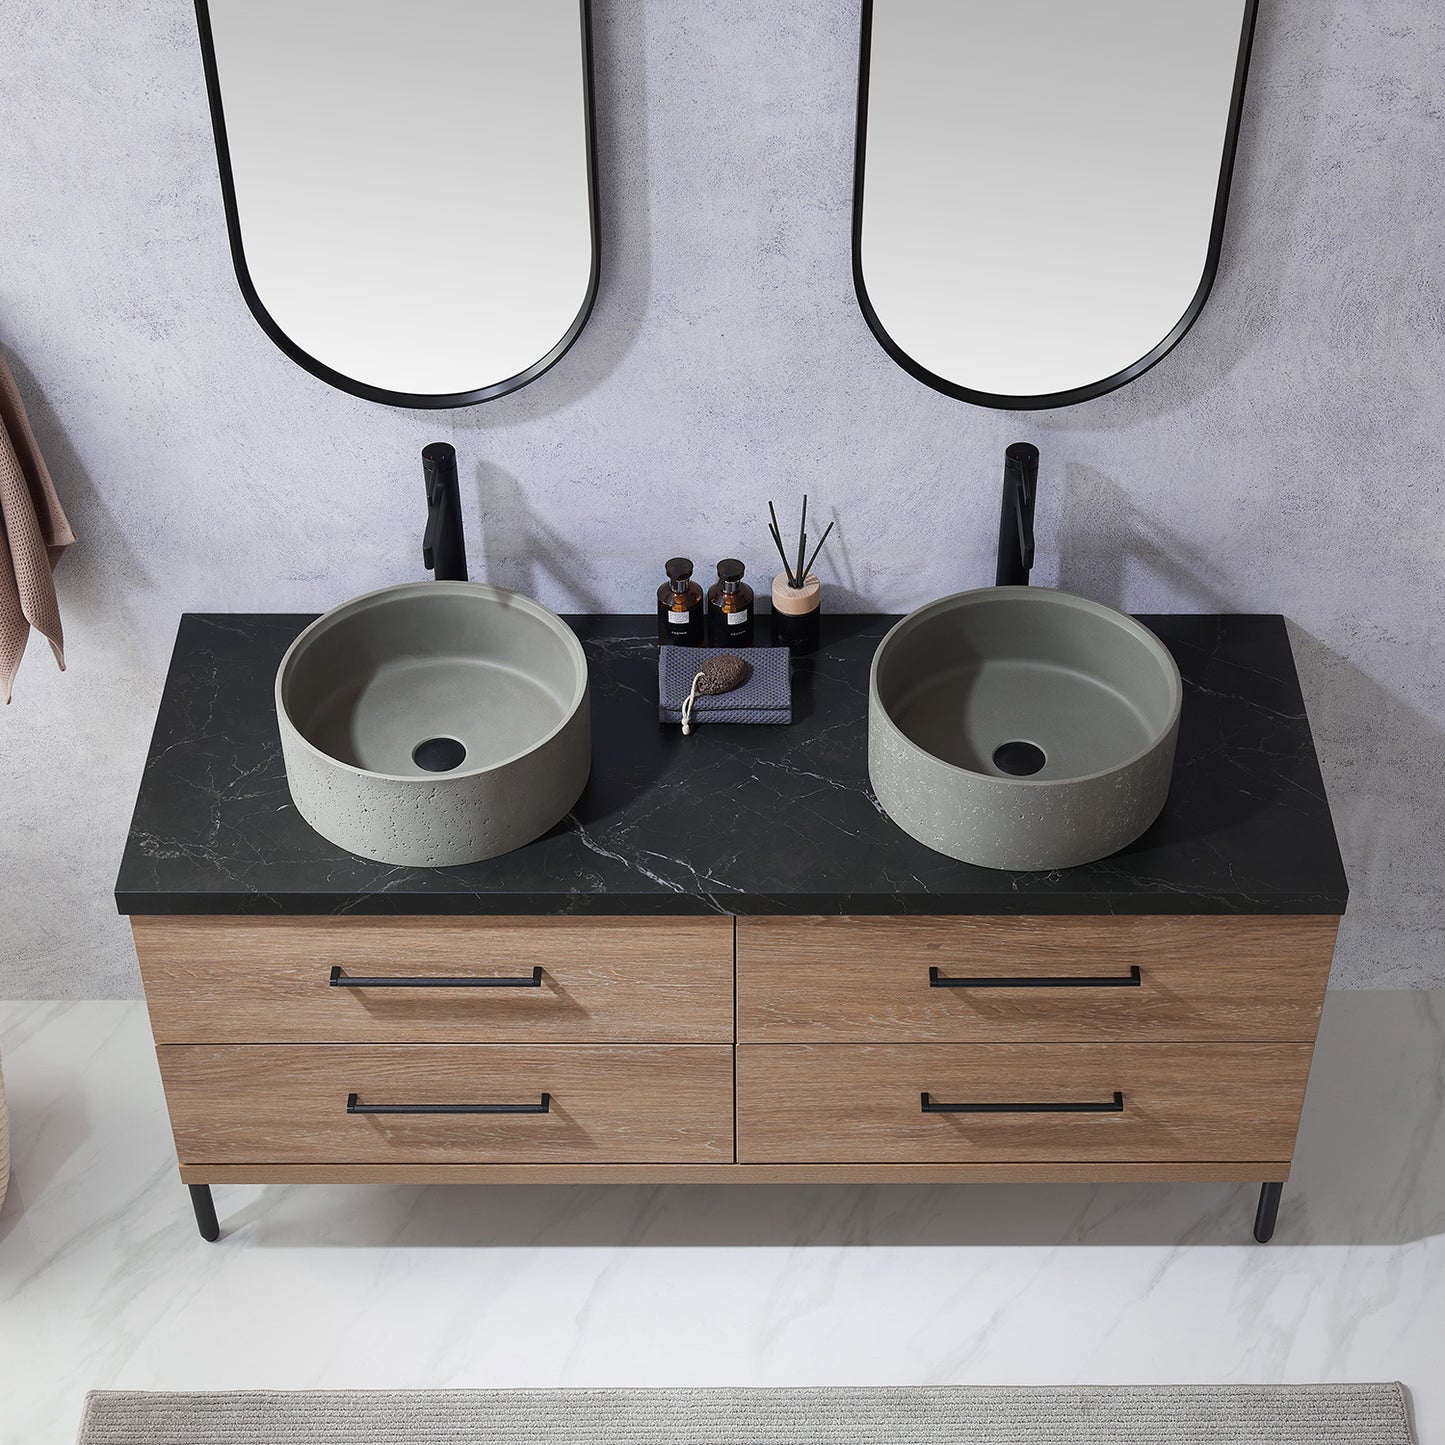 Trento 60" Double Sink Bath Vanity in North American Oak with Black Centered Stone Top with Concrete Sink and Mirror